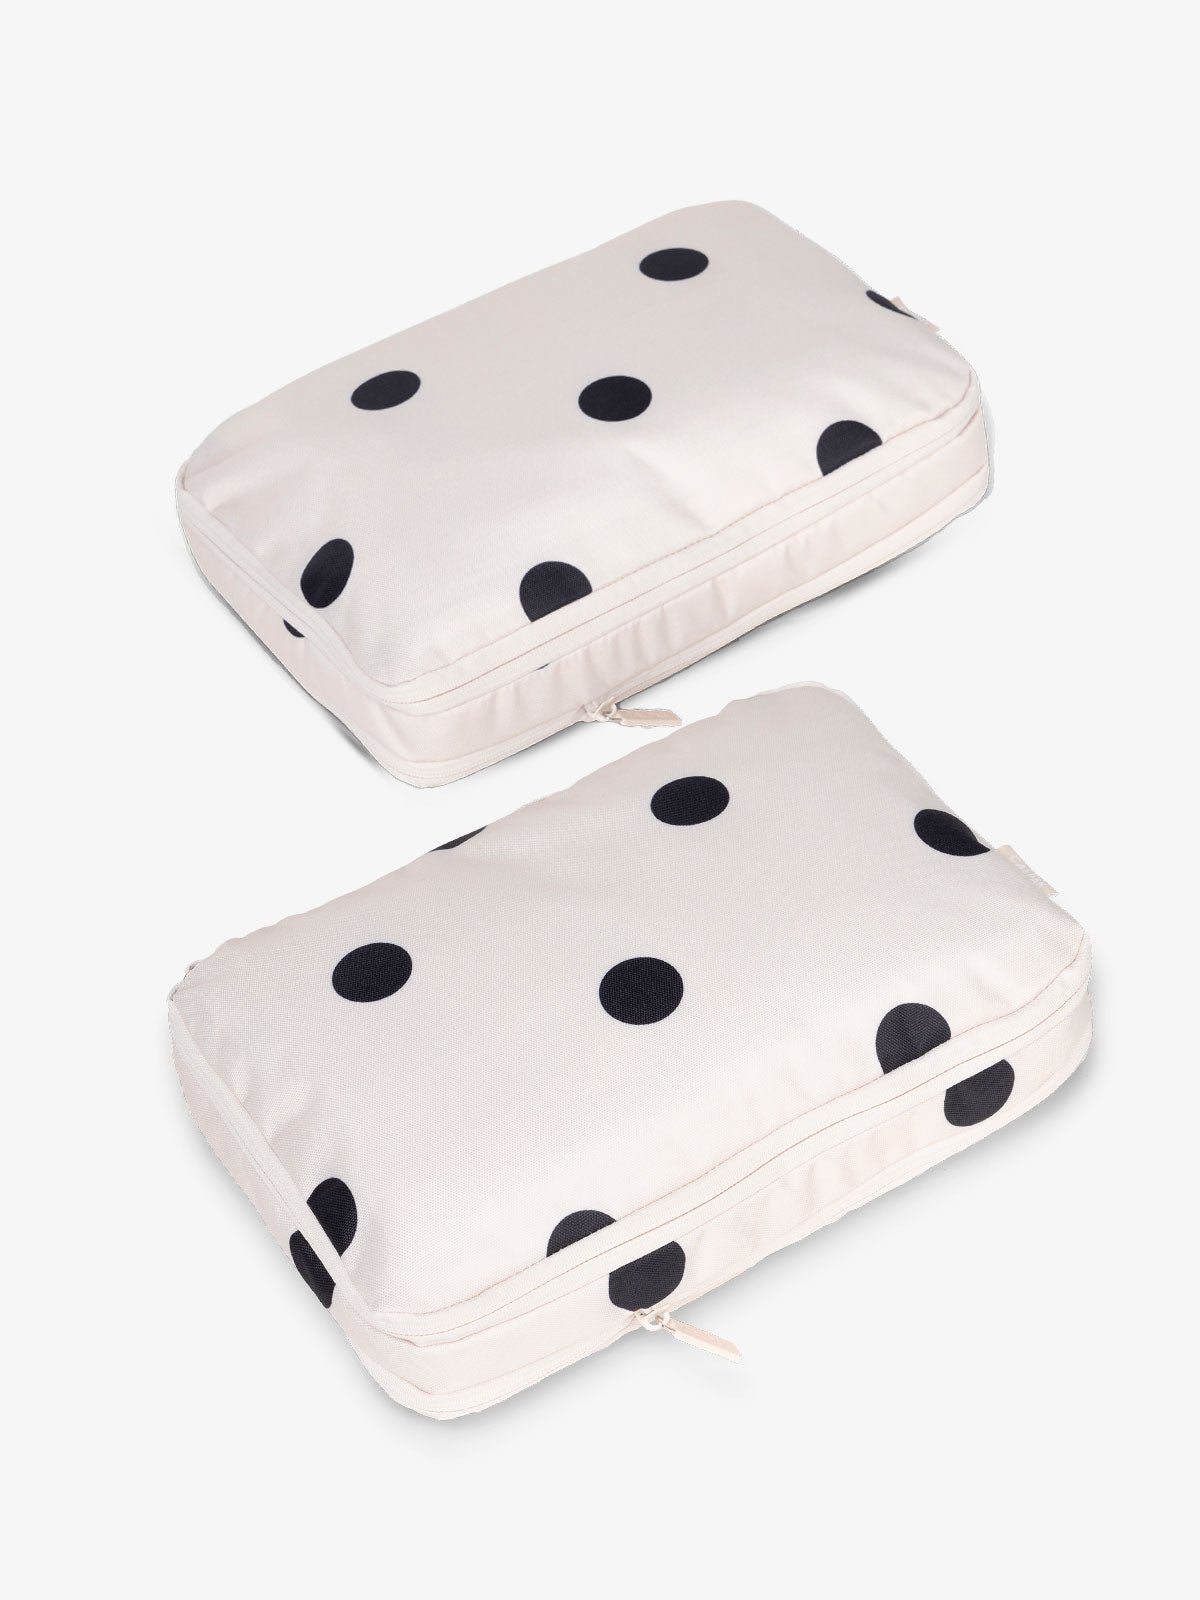 CALPAK Large Compression Packing Cubes in black and white polka dot